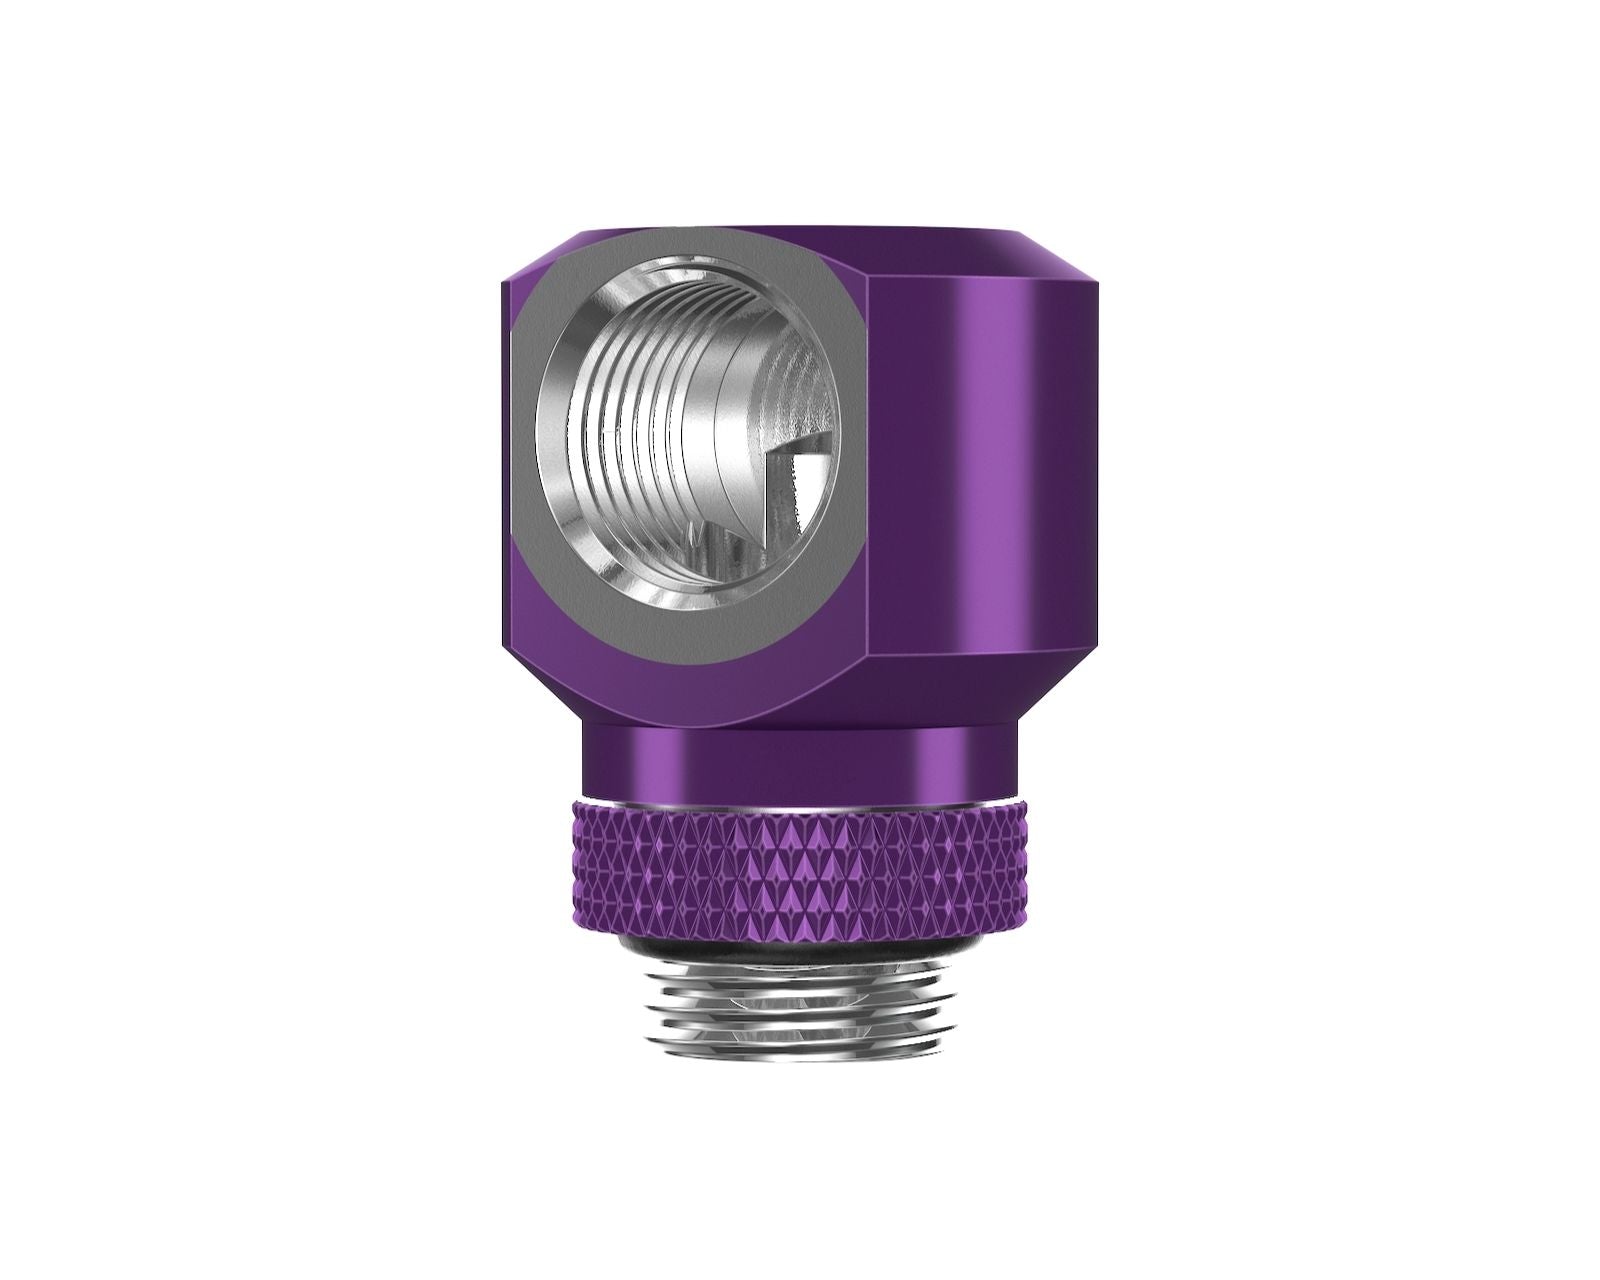 PrimoChill InterConnectSX Flat 90 Degree Rotary Fitting (FAF90) – Enhanced PC Cooling with Sleek Aesthetics - Available in 20+ Colors, Custom Watercooling Loop Ready - Candy Purple